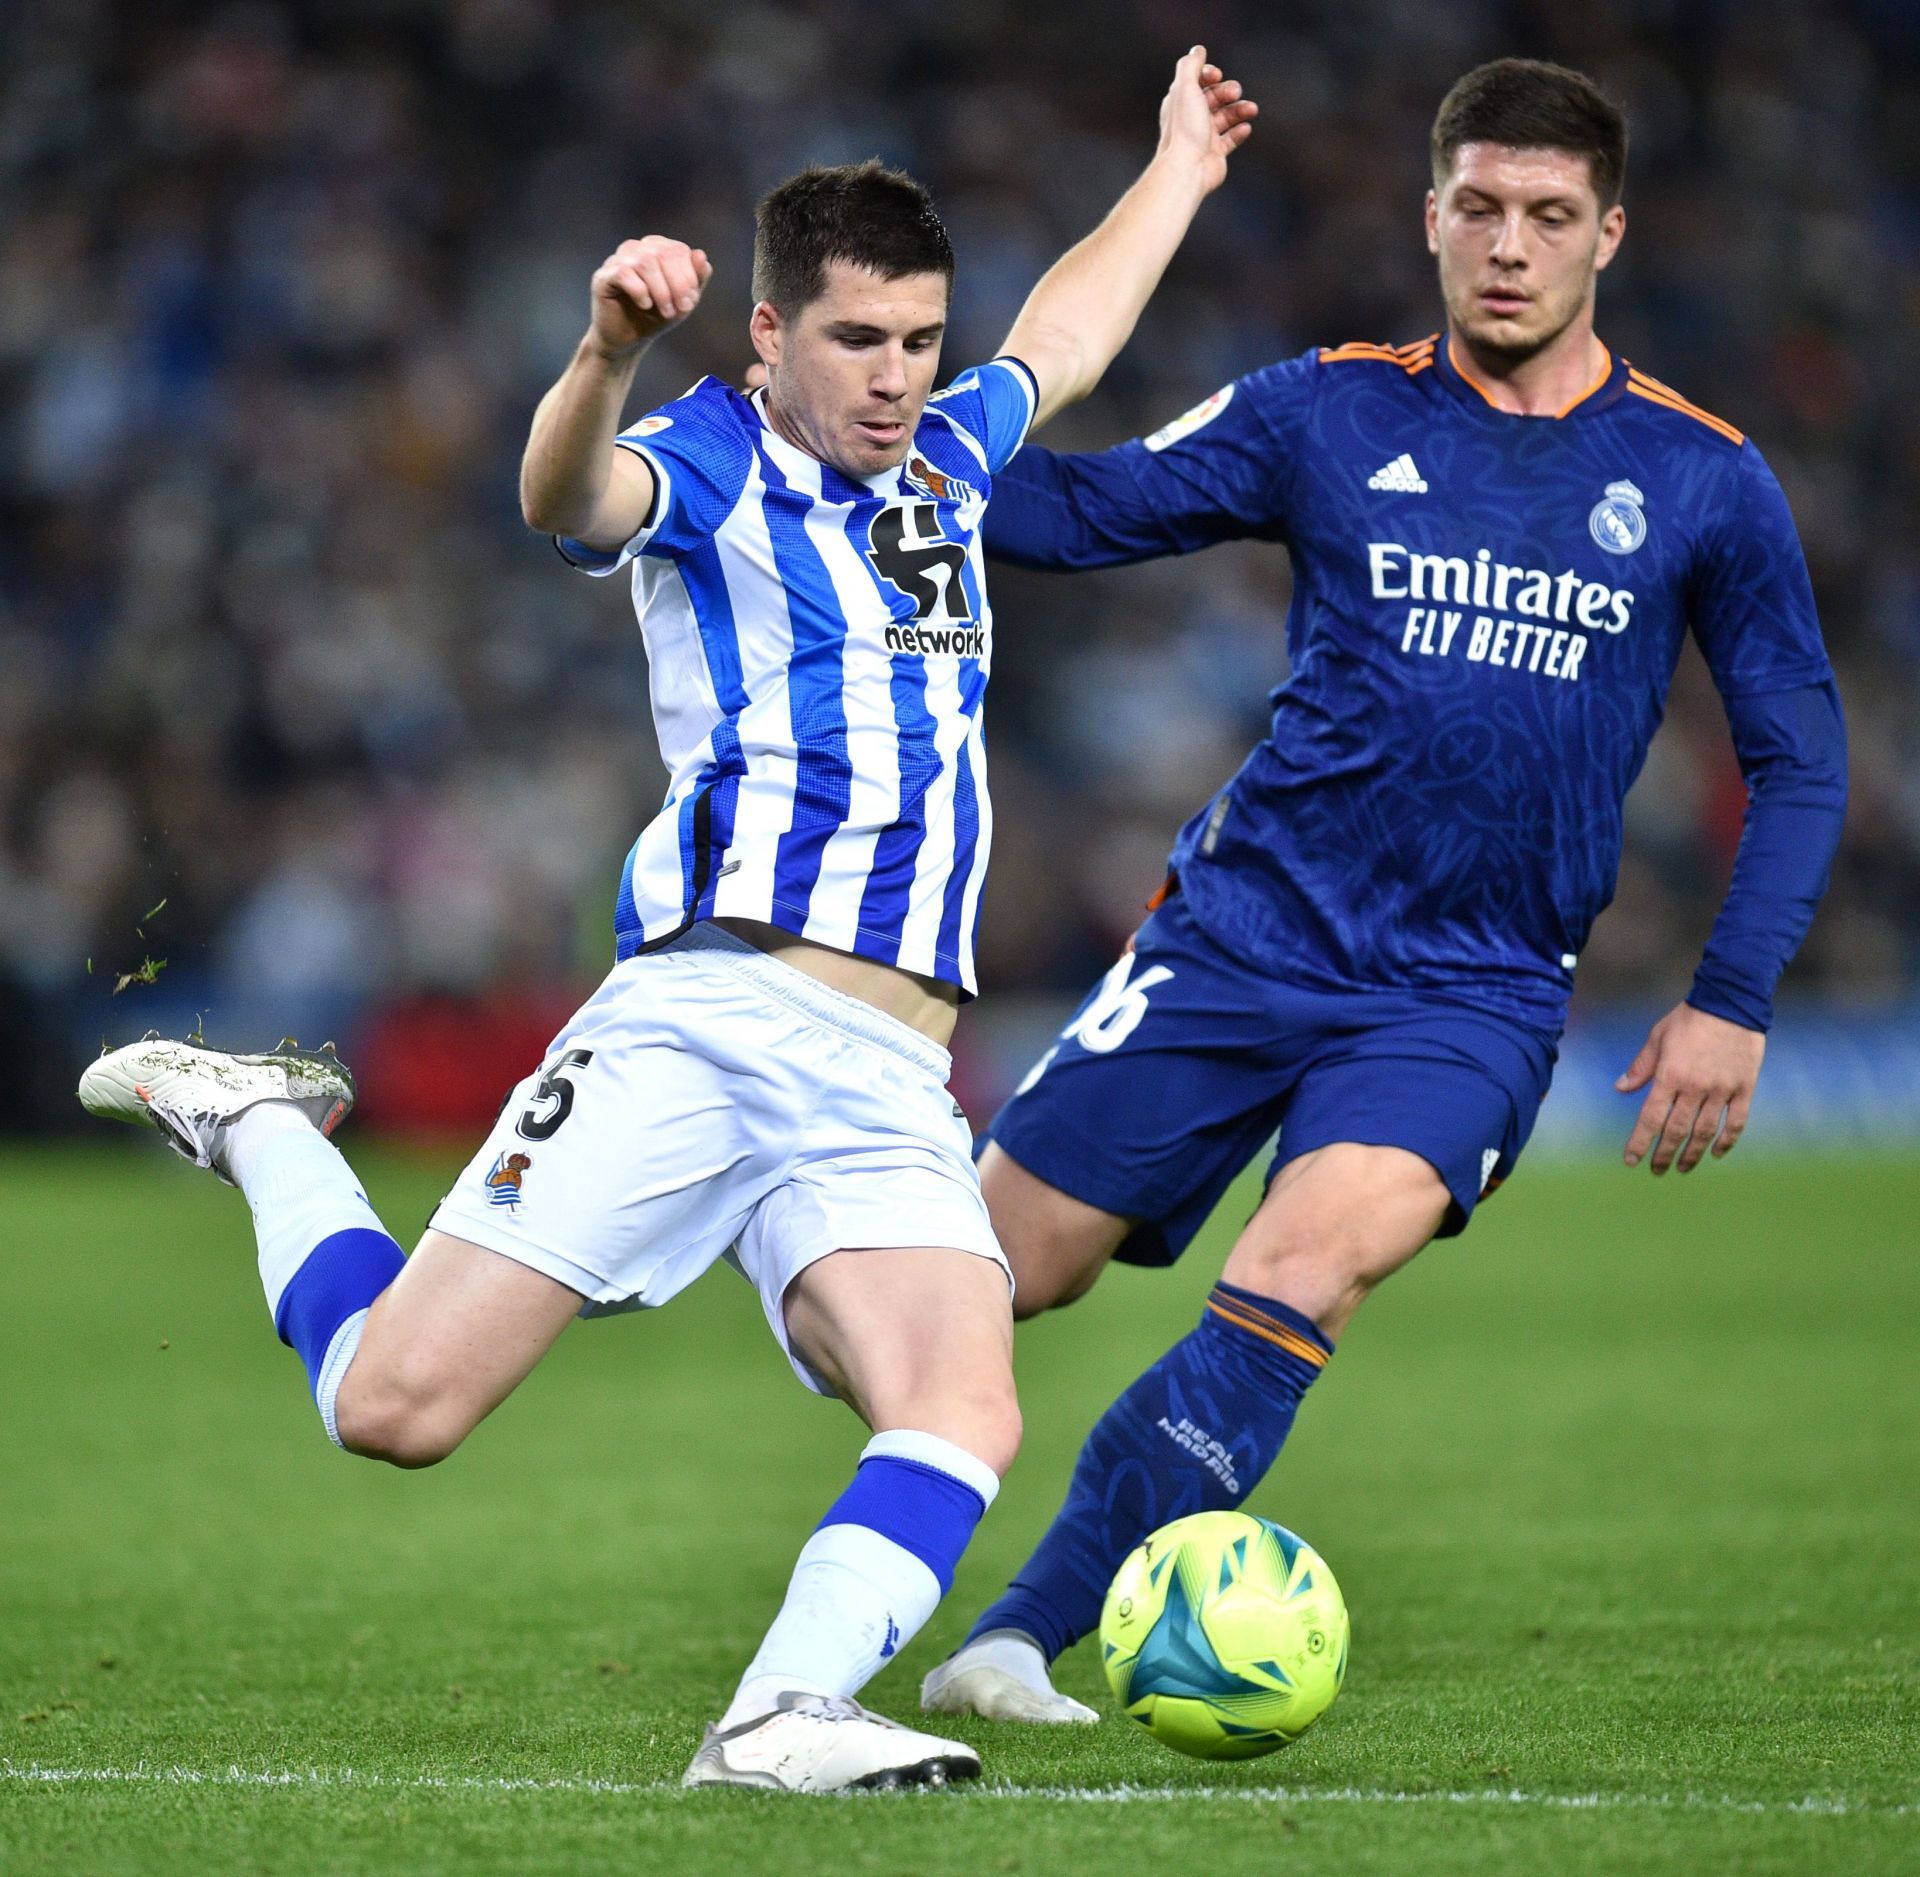 Luka Jovic in action against Real Sociedad